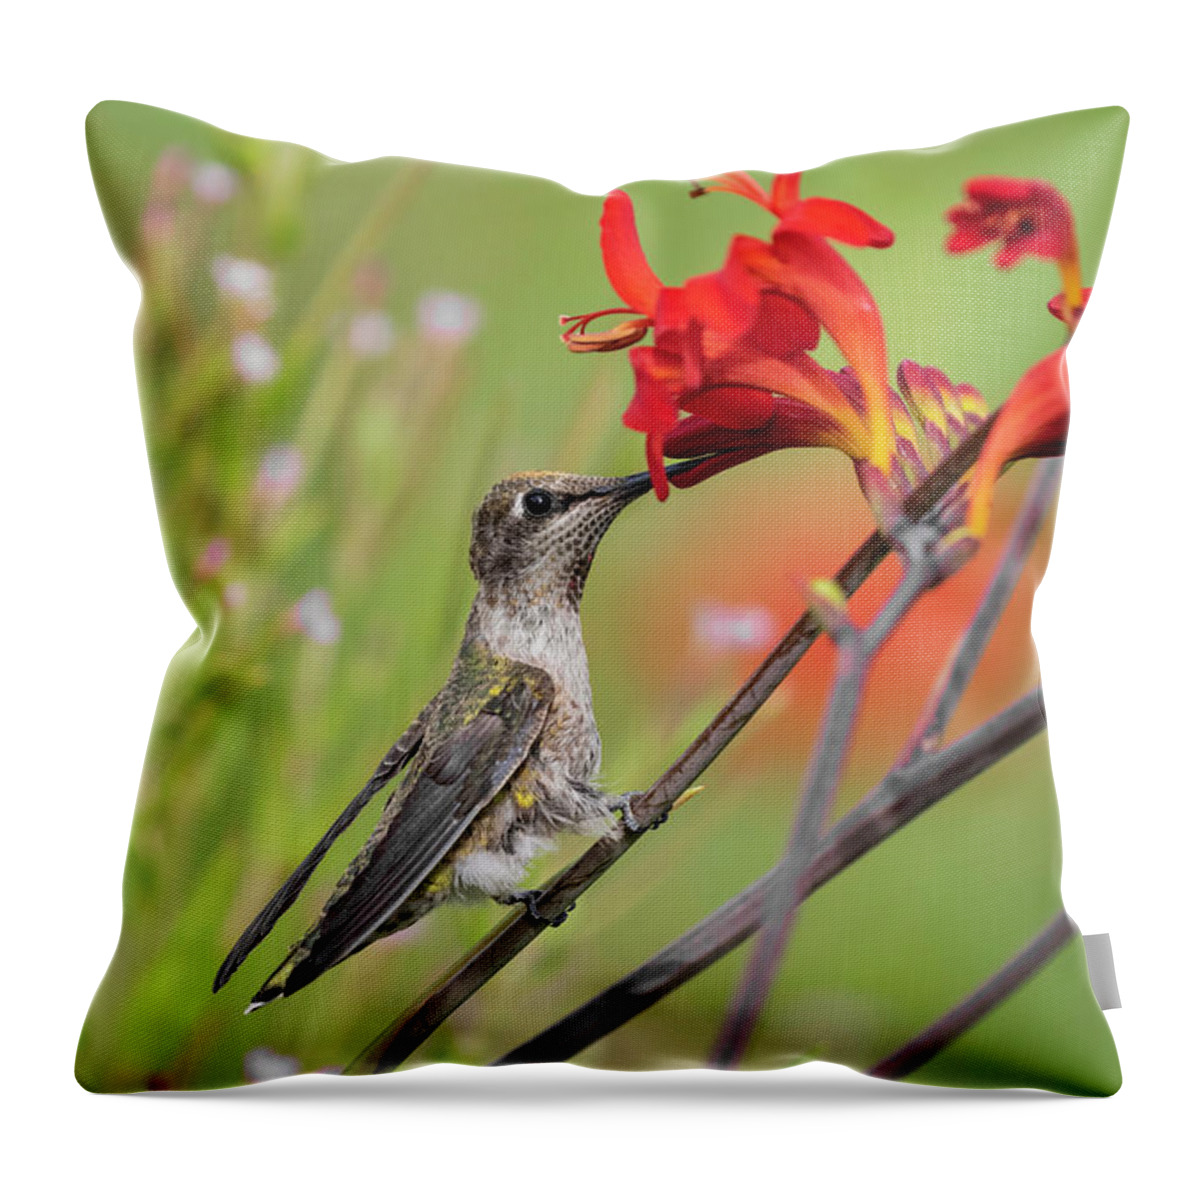 Sipping Sipping Away Throw Pillow featuring the photograph Sipping Sipping Away by Wes and Dotty Weber